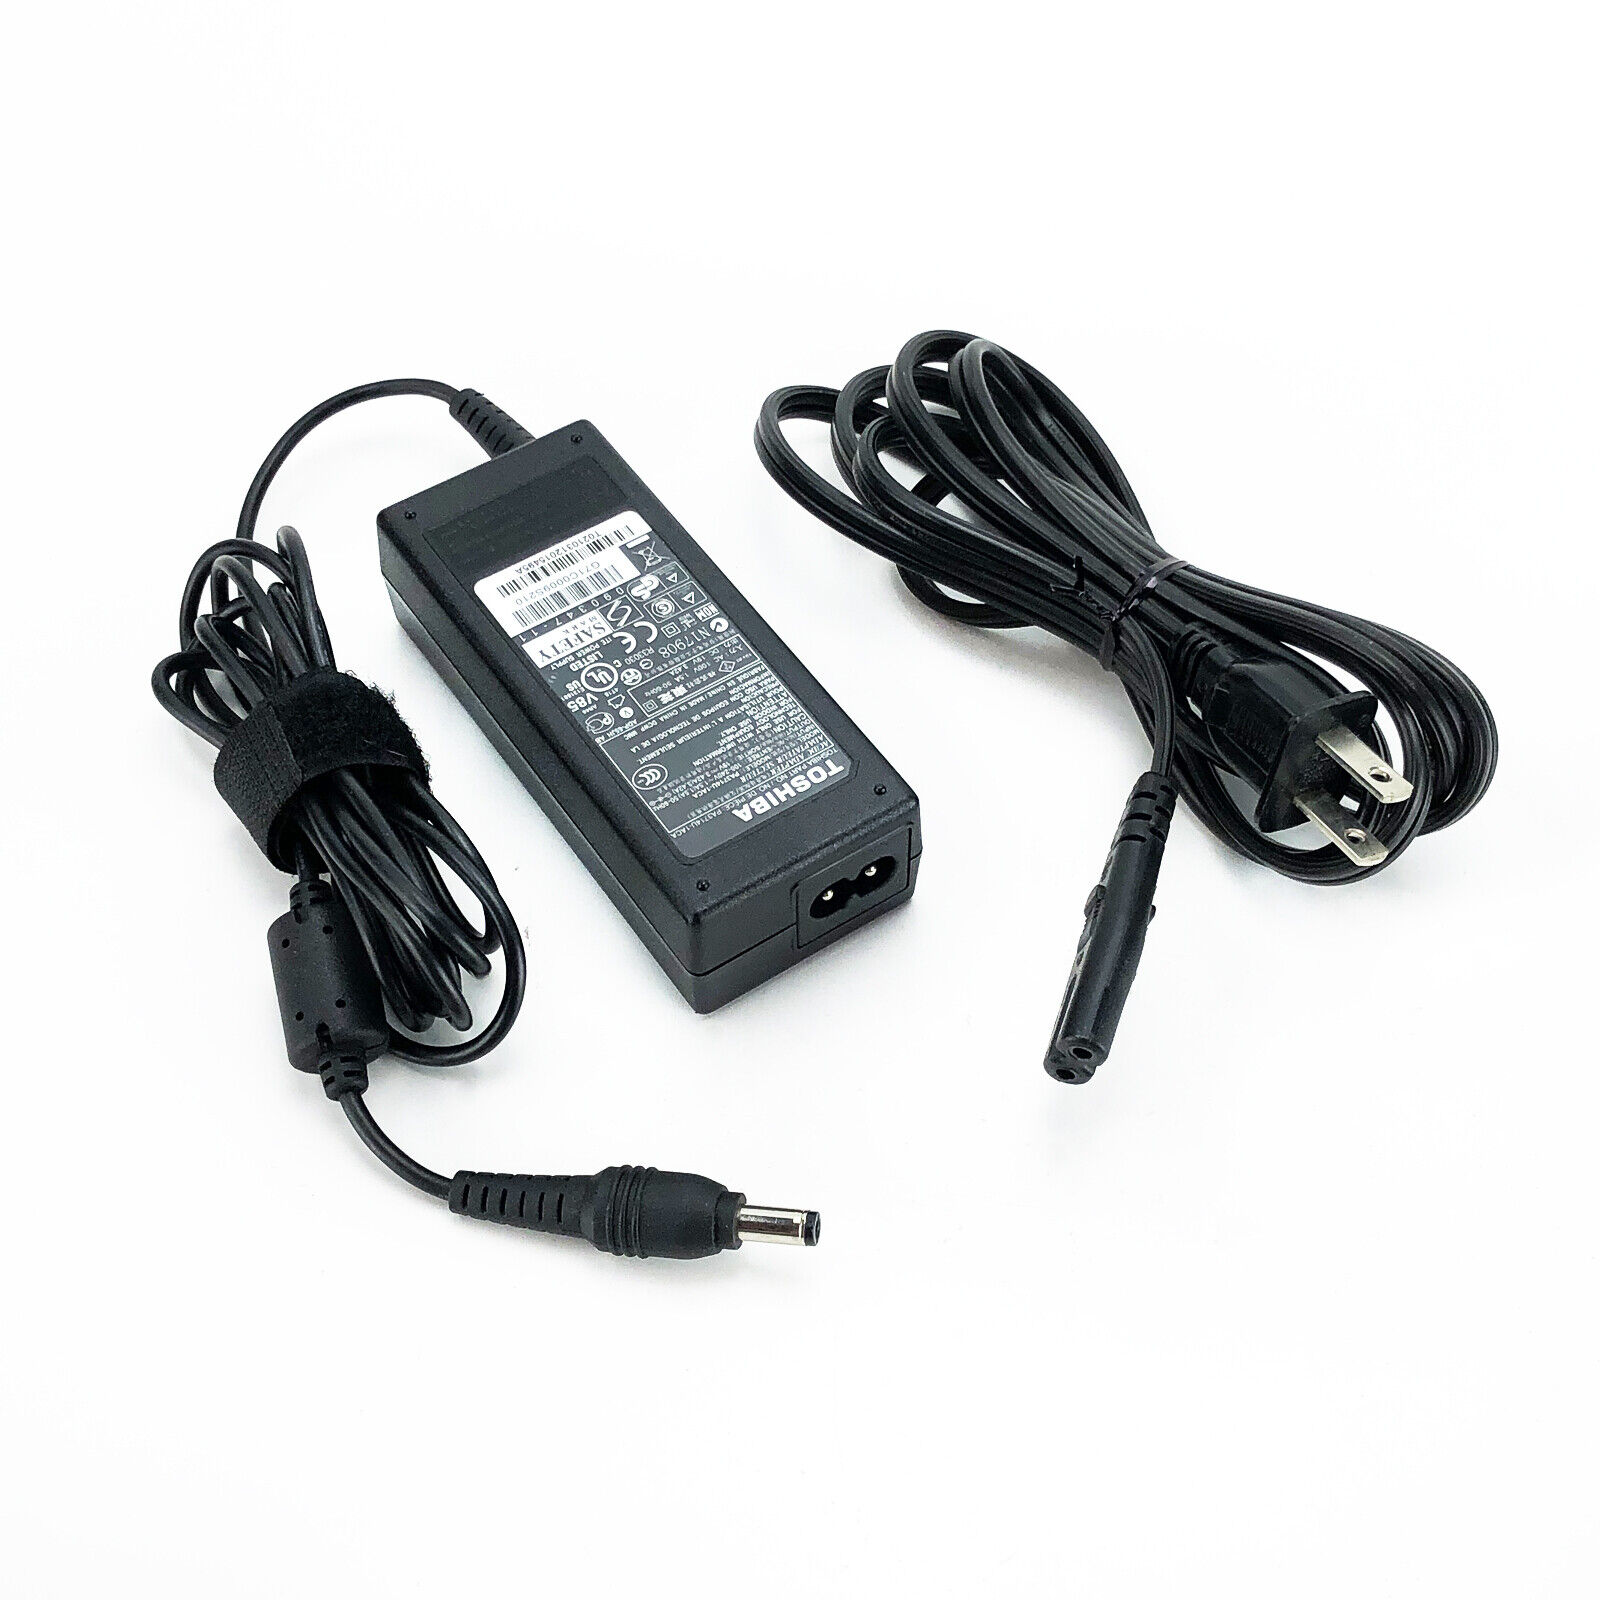 Open Box Genuine AC Adapter Charger for Toshiba Laptop with Cord 19V 3.42A 65W